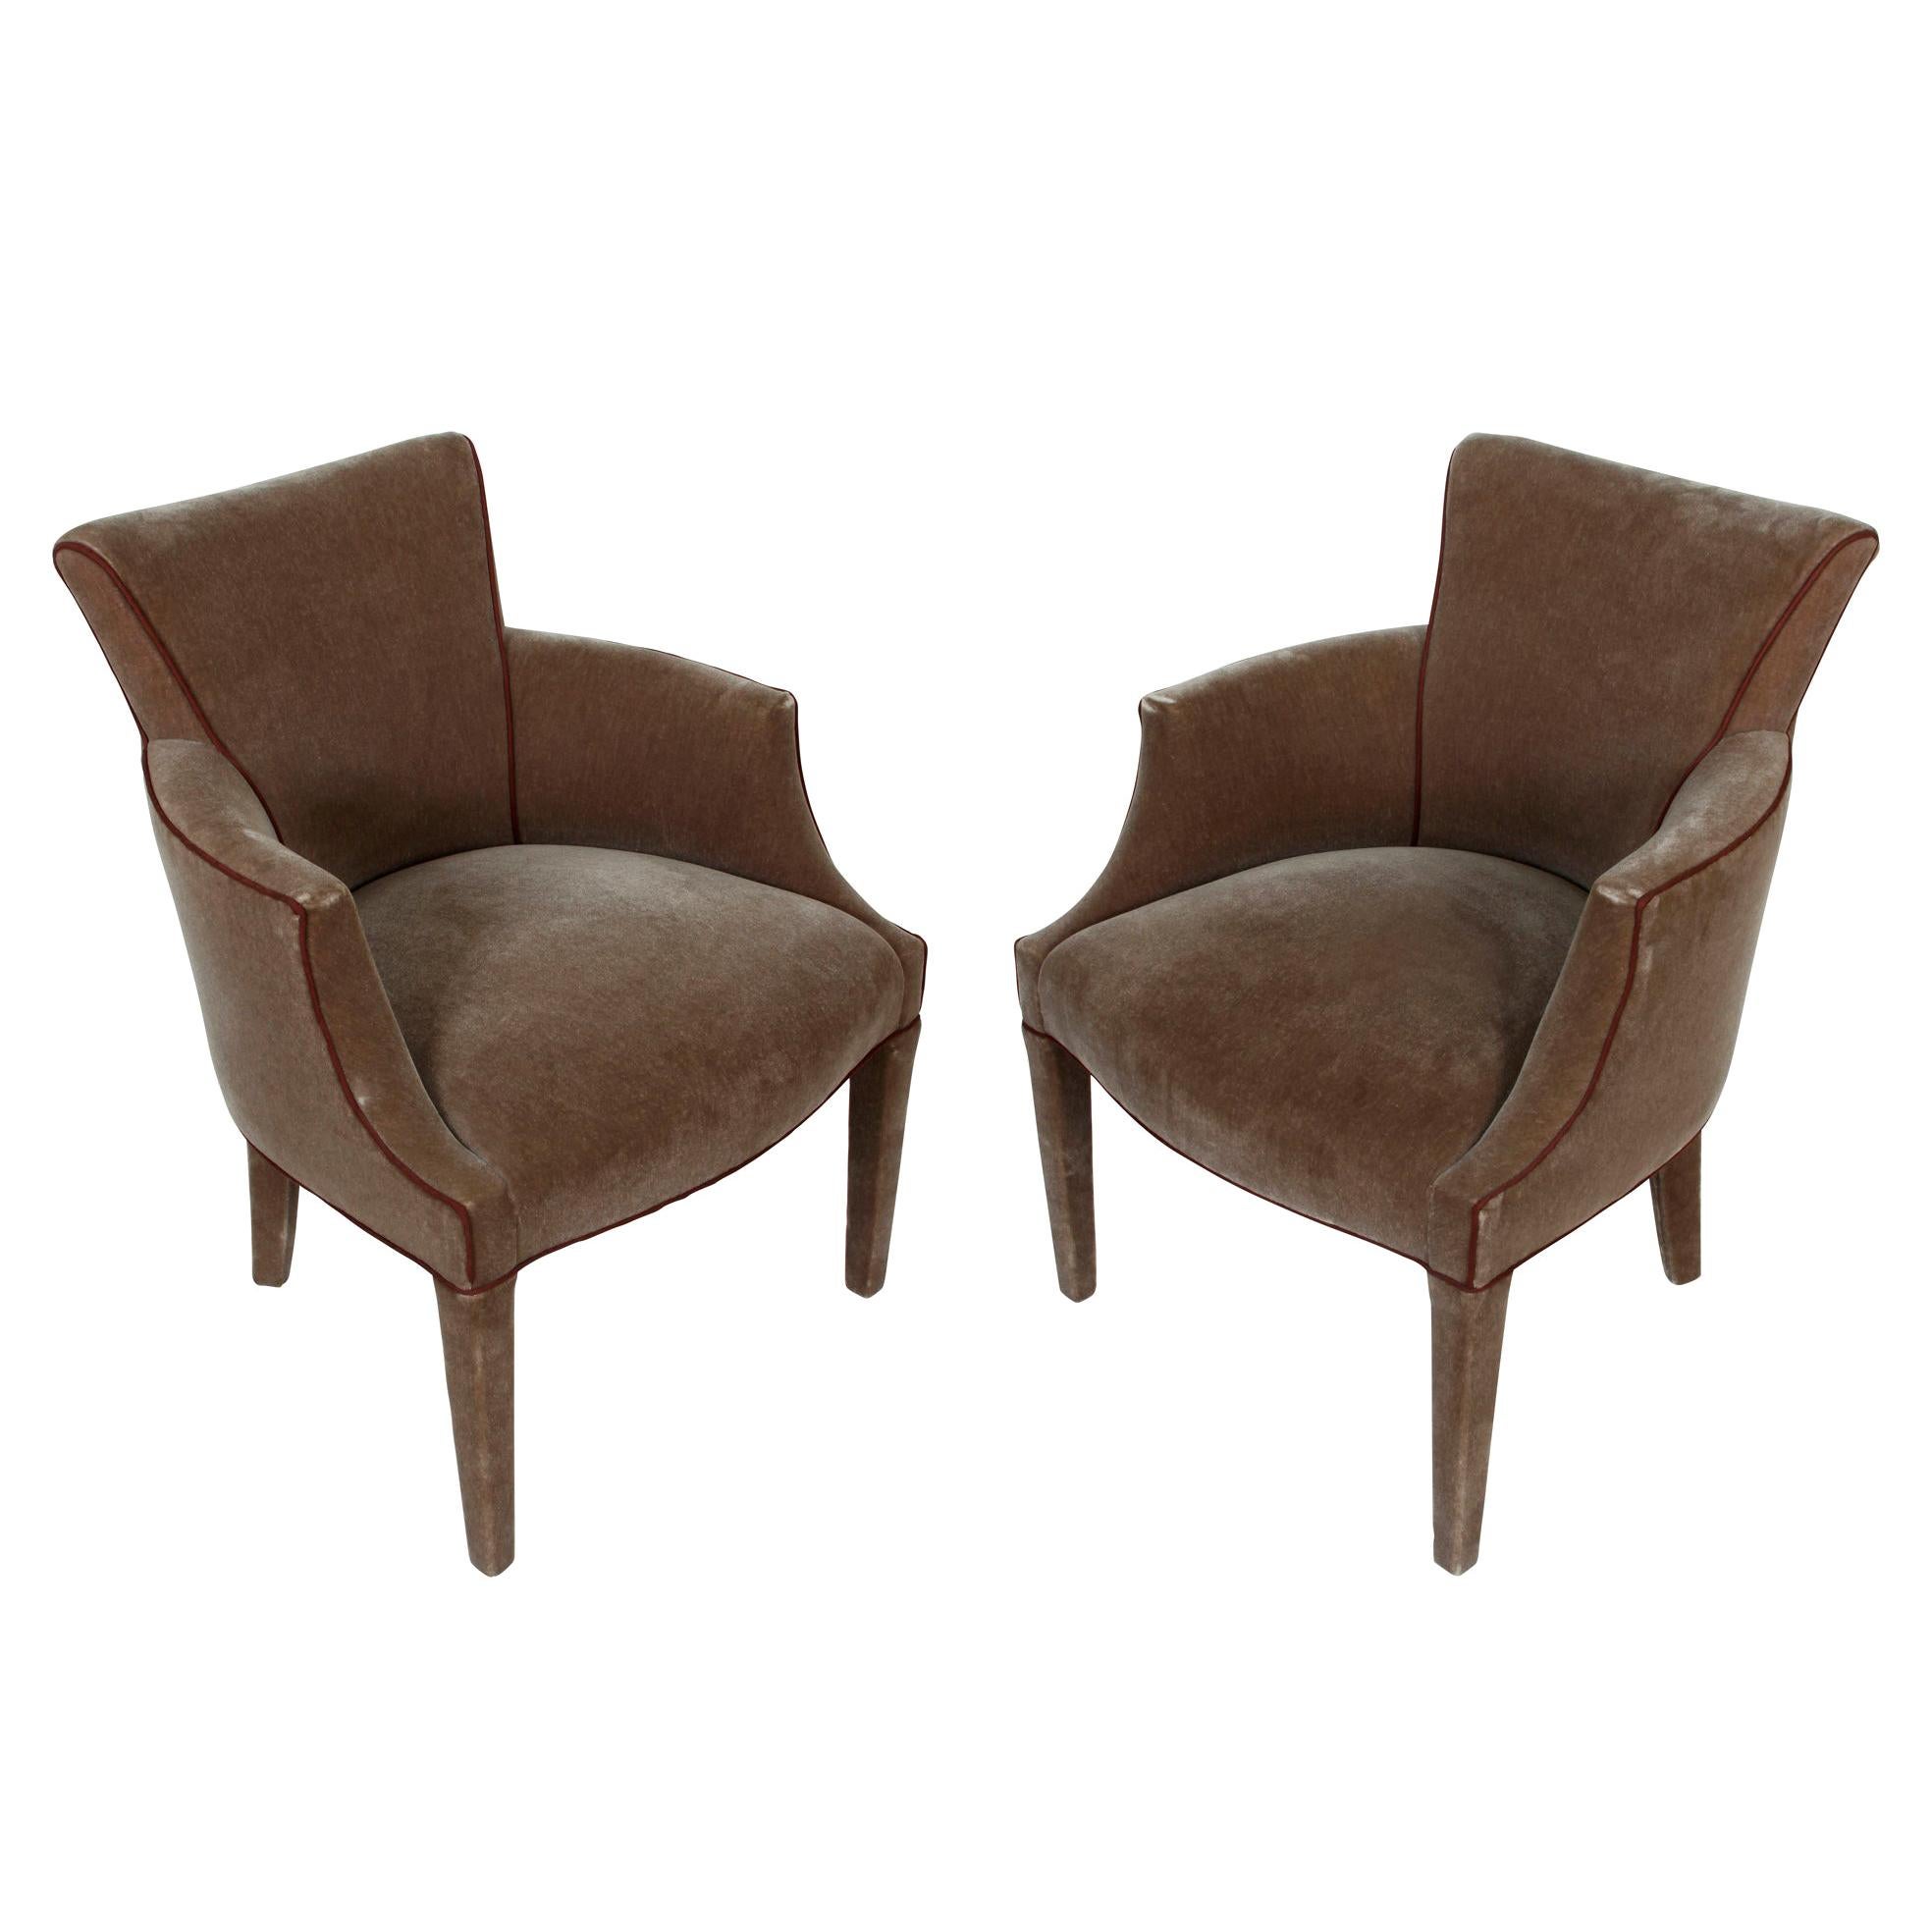 Pair of Donghia Style Mohair Armchairs